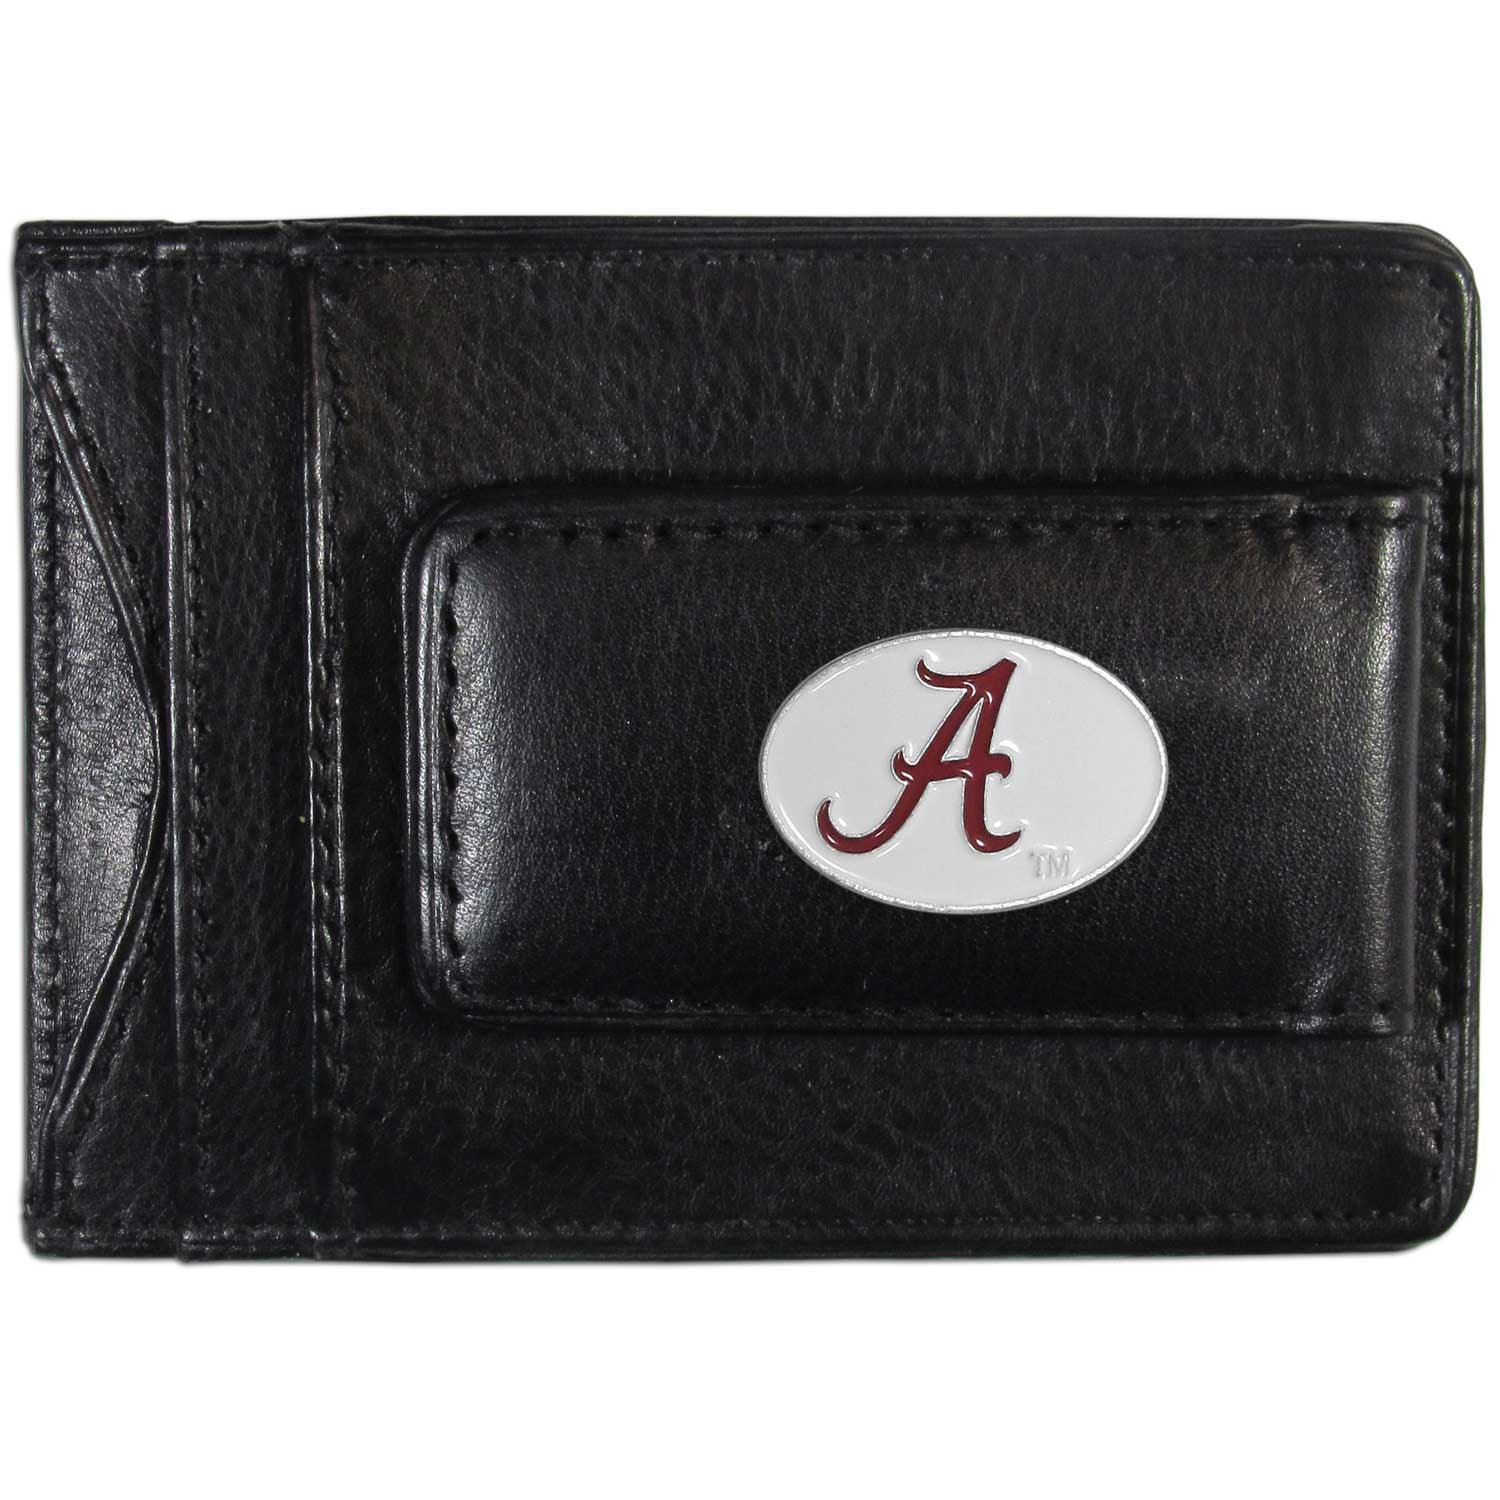 Penn State Nittany Lions Leather Cash & Cardholder